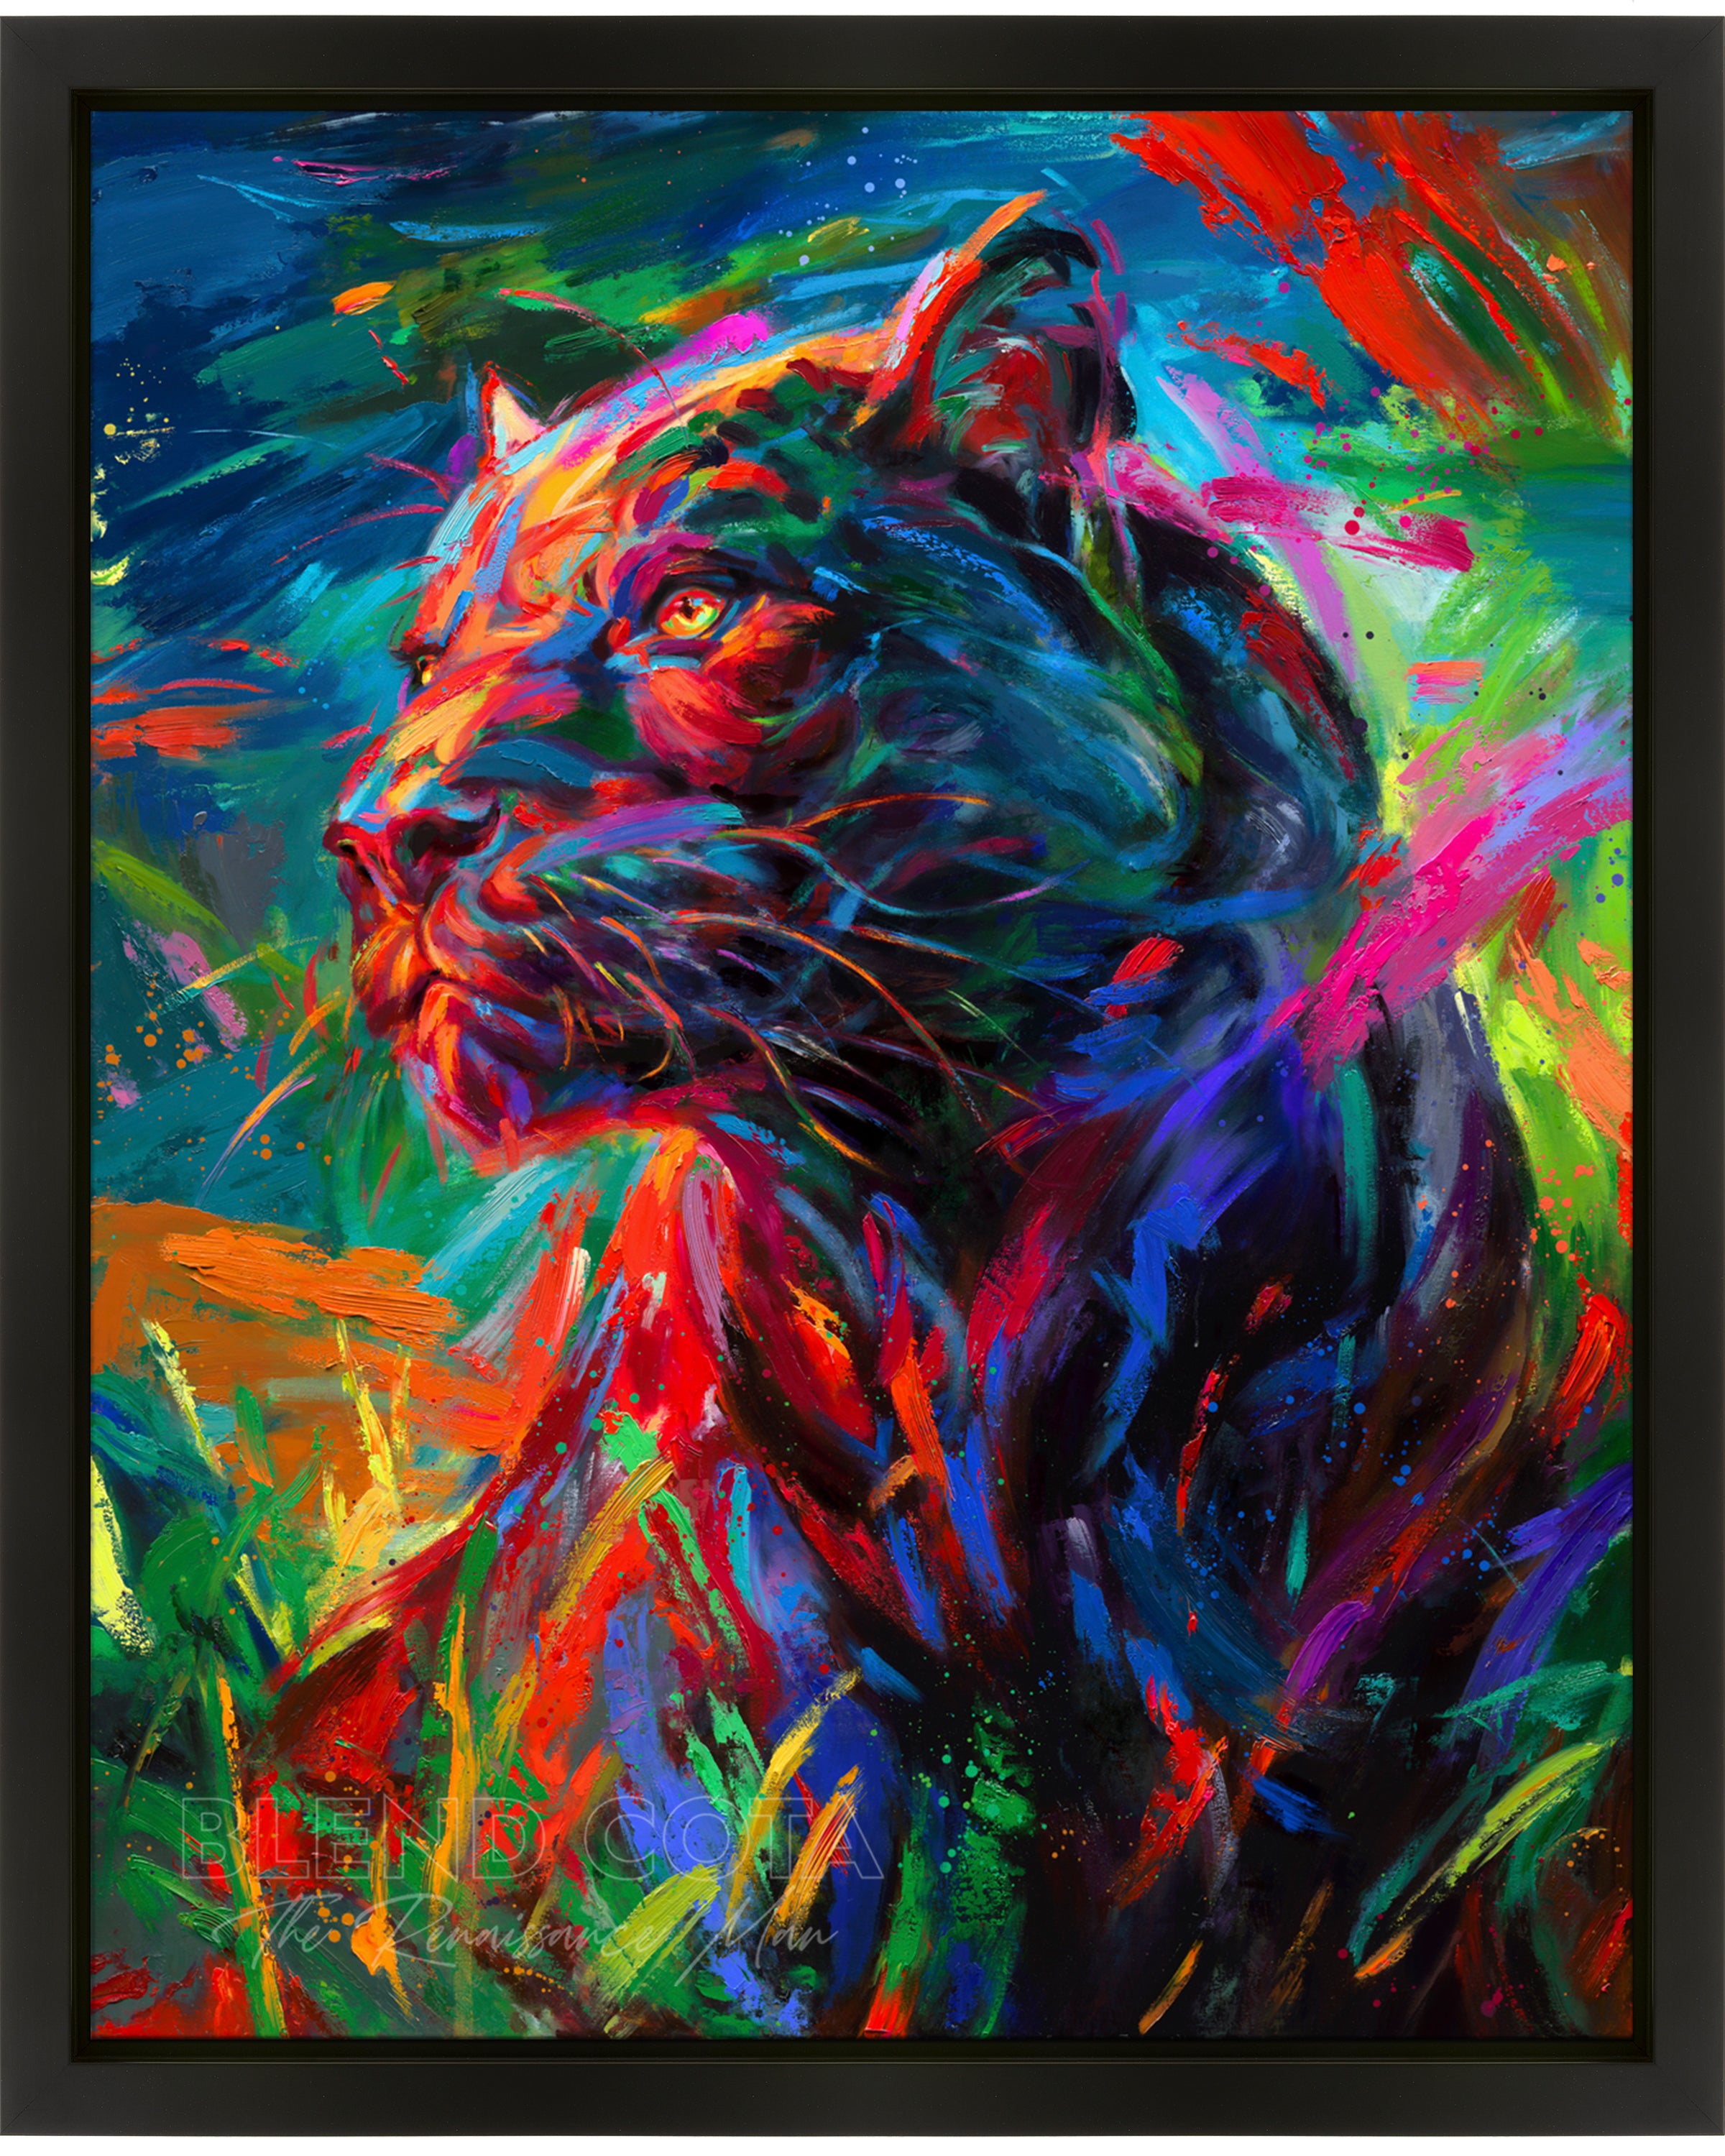 Framed original oil painting on canvas of the black panther stalking its prey through the long night painted with colorful brushstrokes in an expressionistic style.